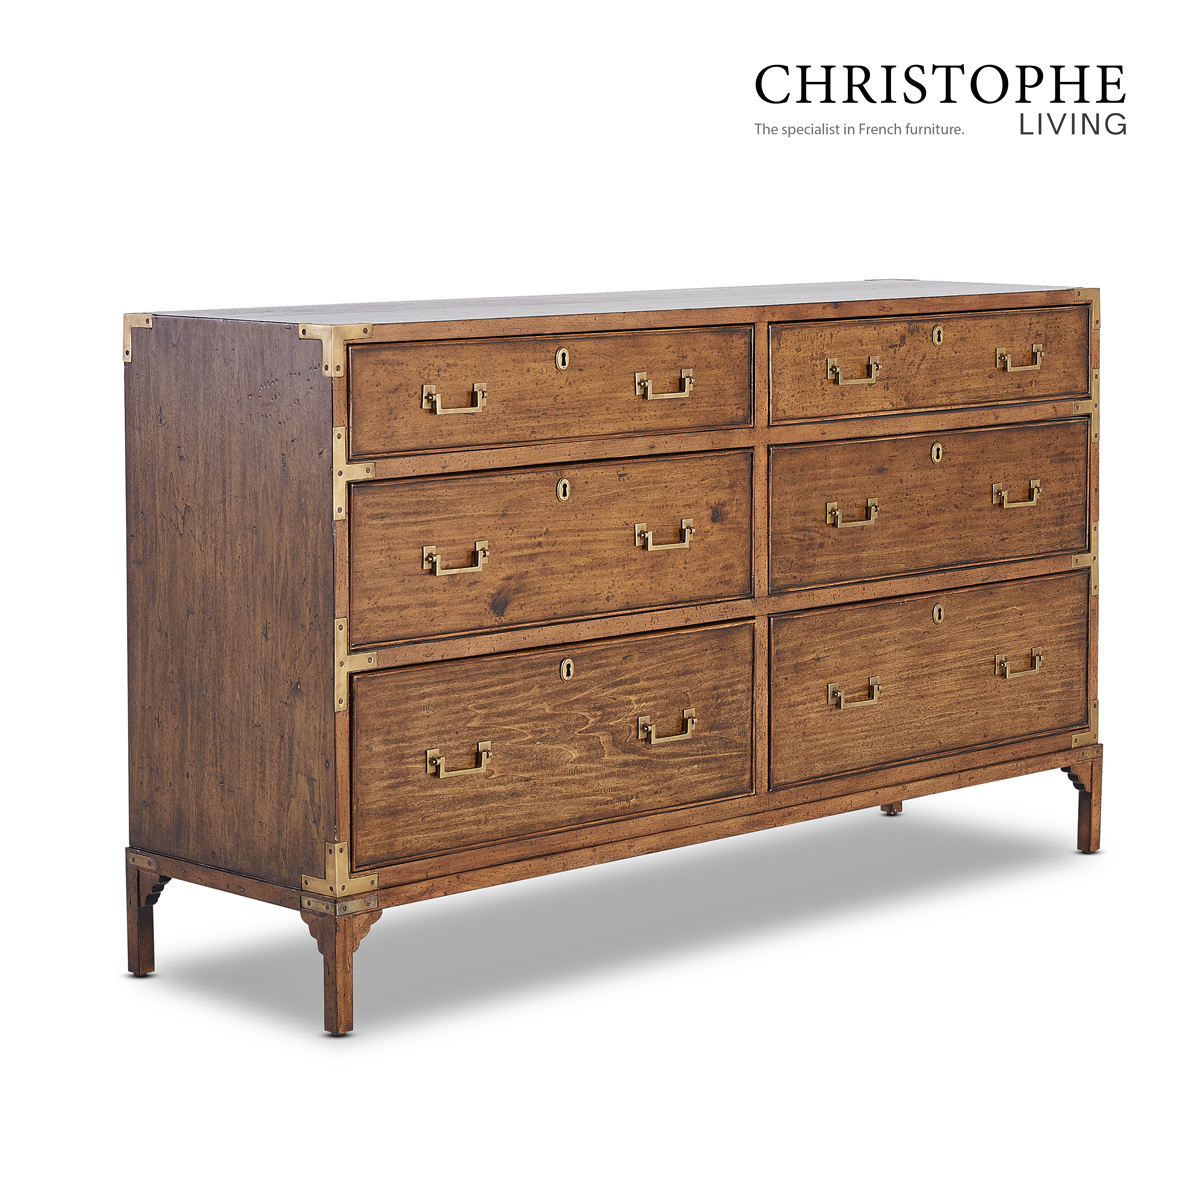 Holland French Provincial Bedroom & Living Room 6-Drawer Chest in Warm Natural Timber and Cognac Finish